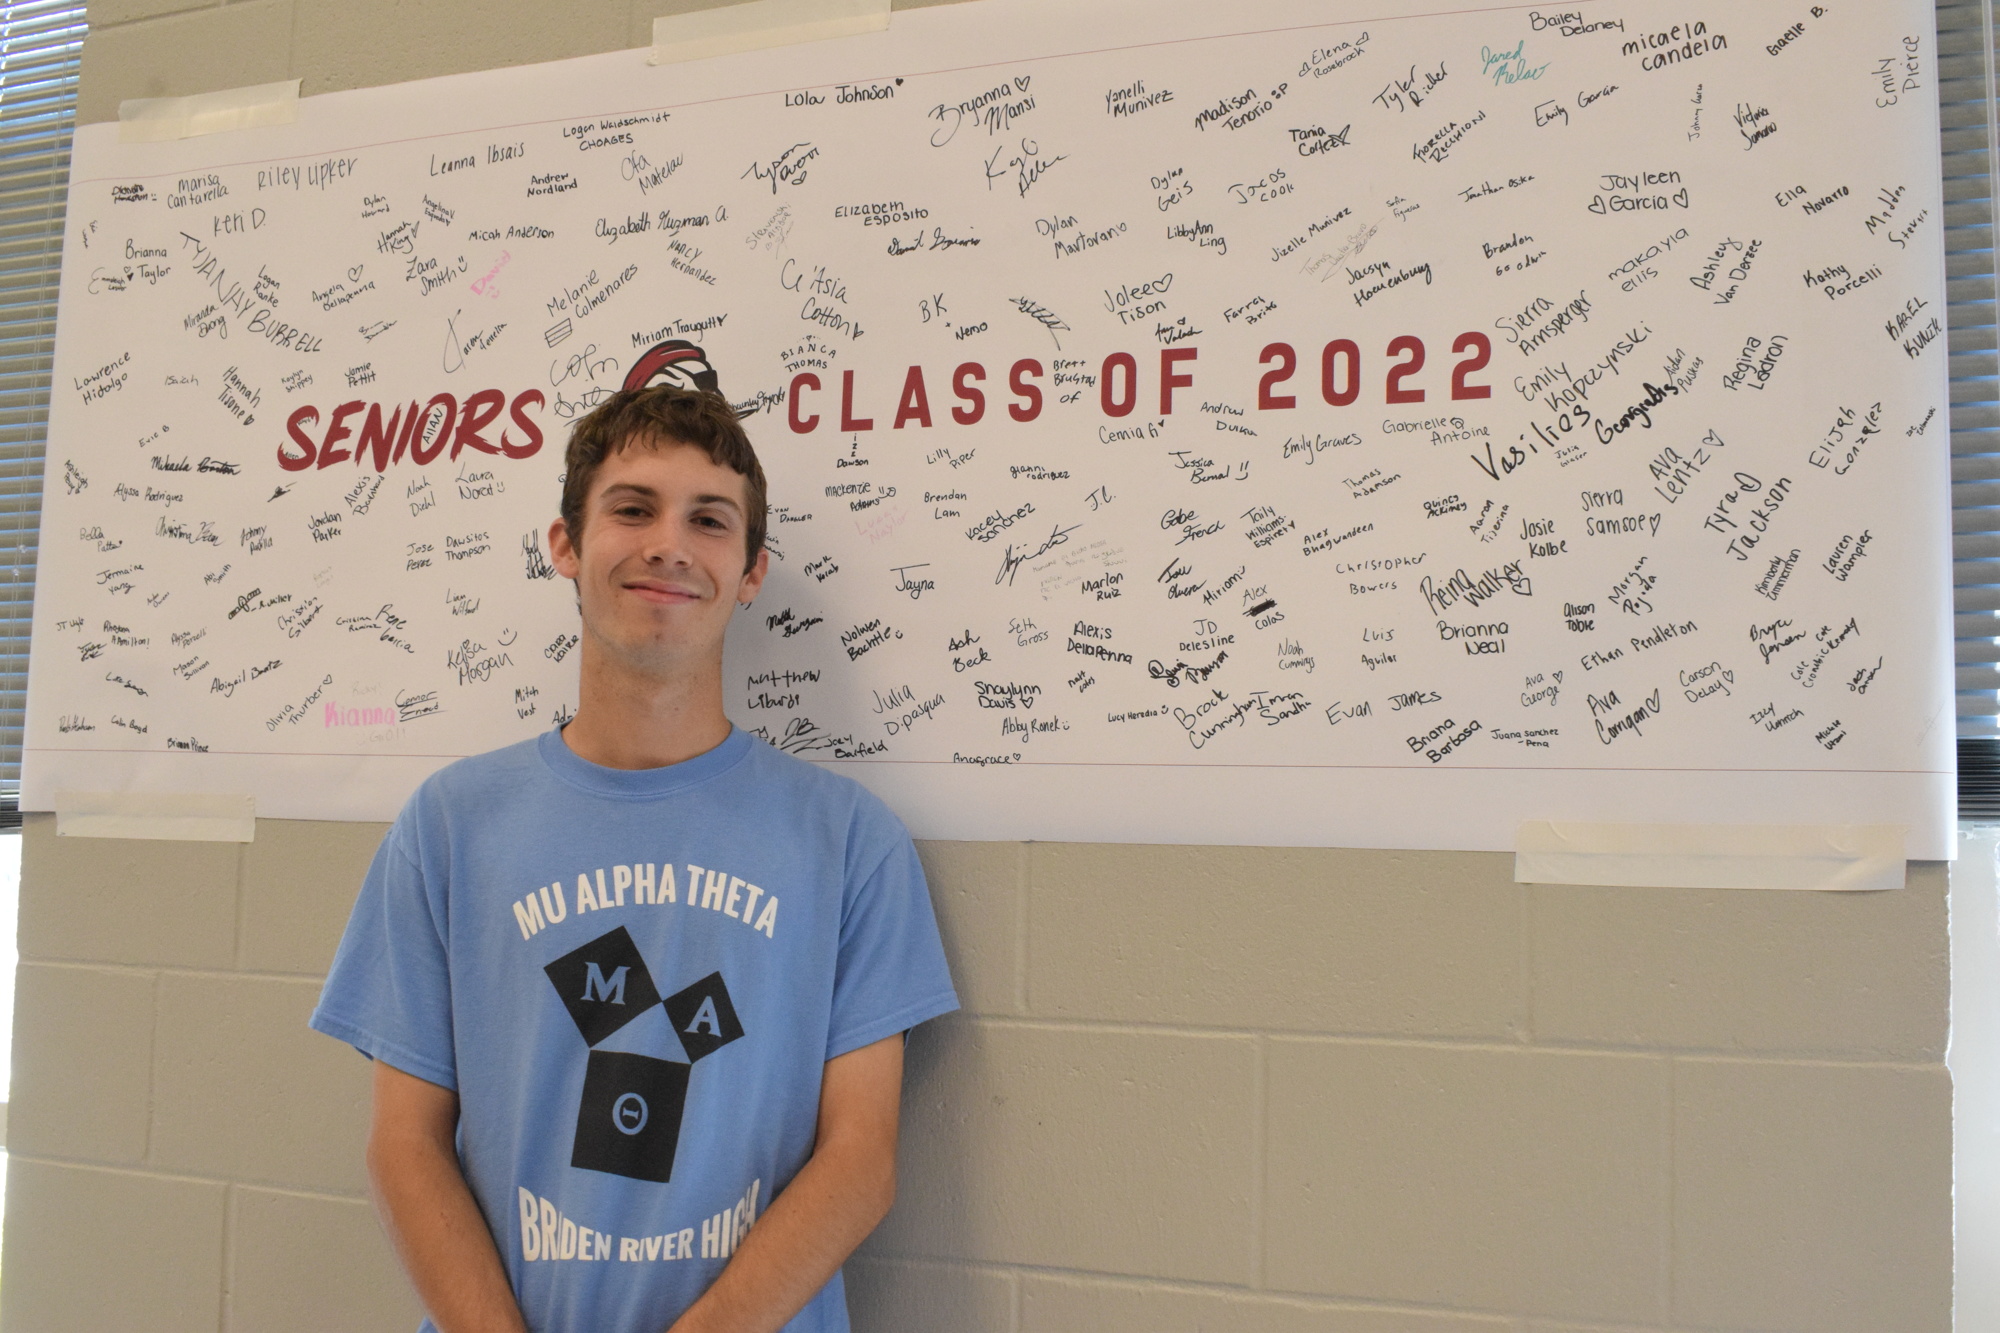 Gabriel French, a senior at Braden River High School, is excited for his future at University of Central Florida after receiving a scholarship to the school.